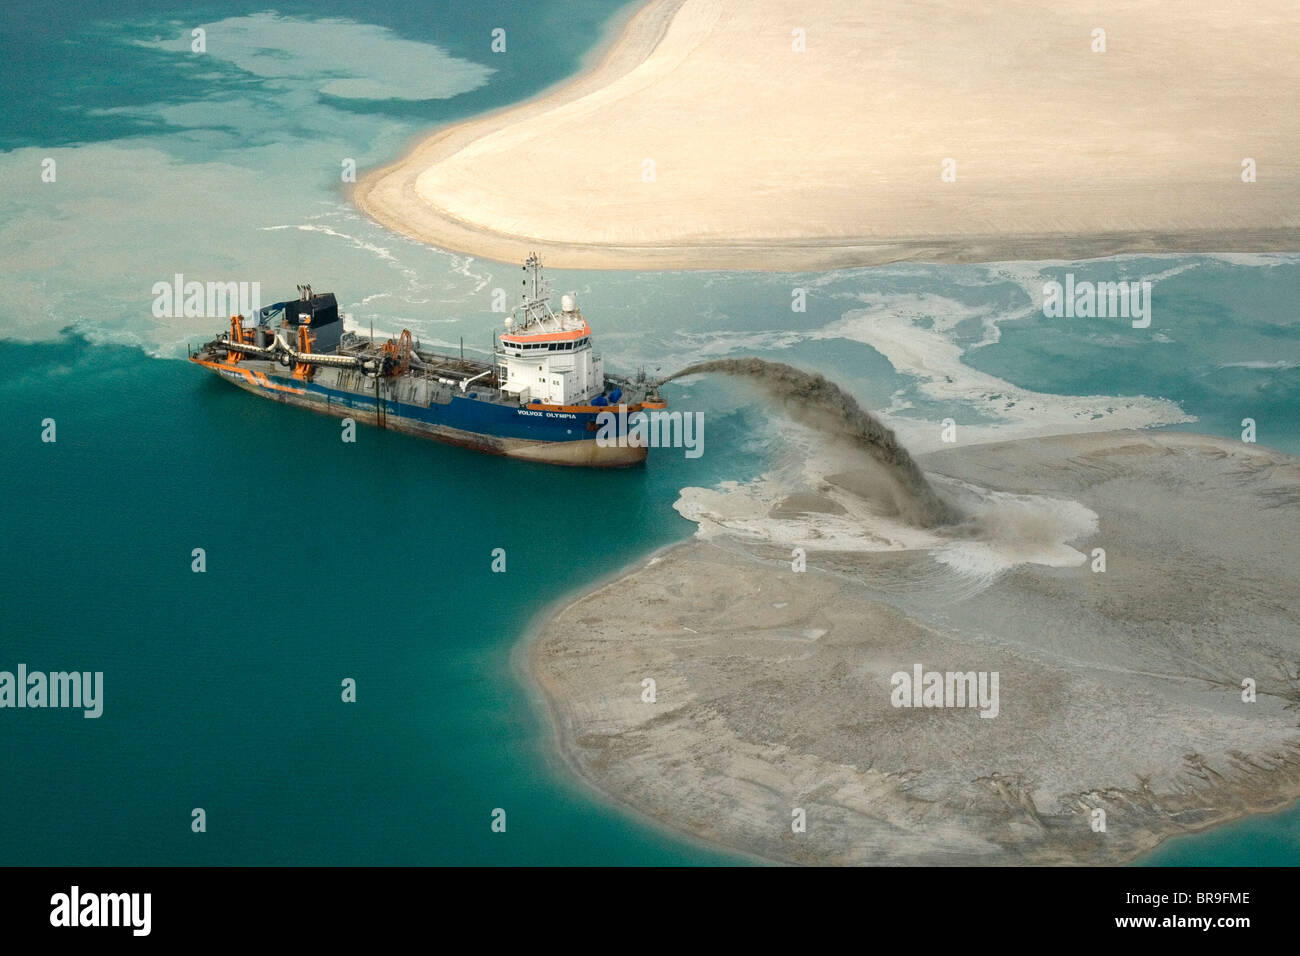 A dredger pumping for land reclamation in the Gulf off Dubai Stock Photo